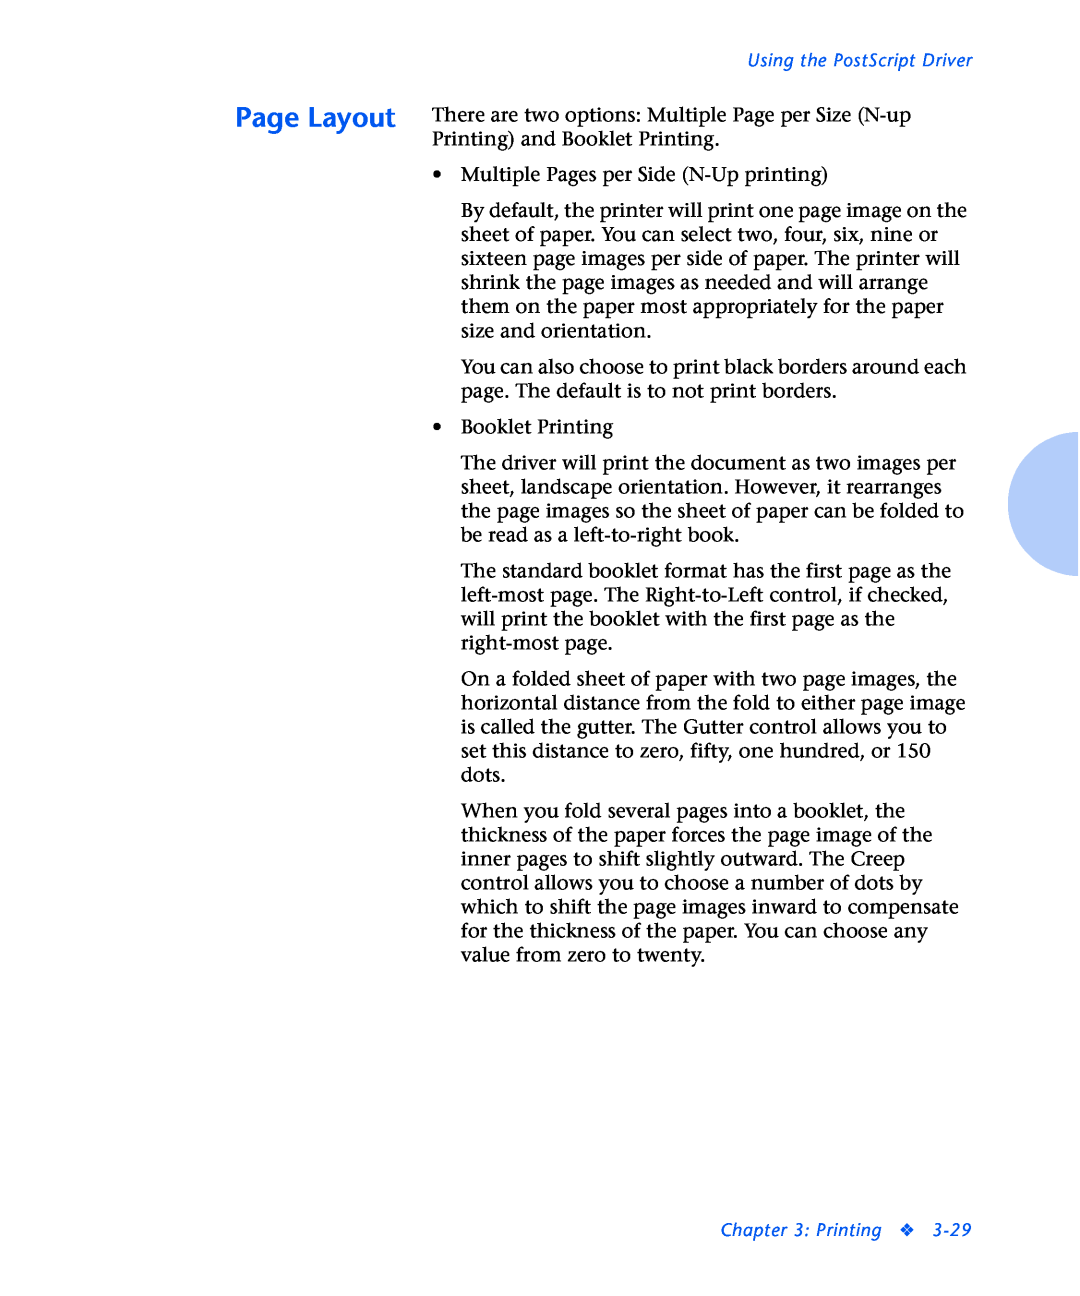 Xerox N2125 manual Page Layout There are two options Multiple Page per Size N-up 